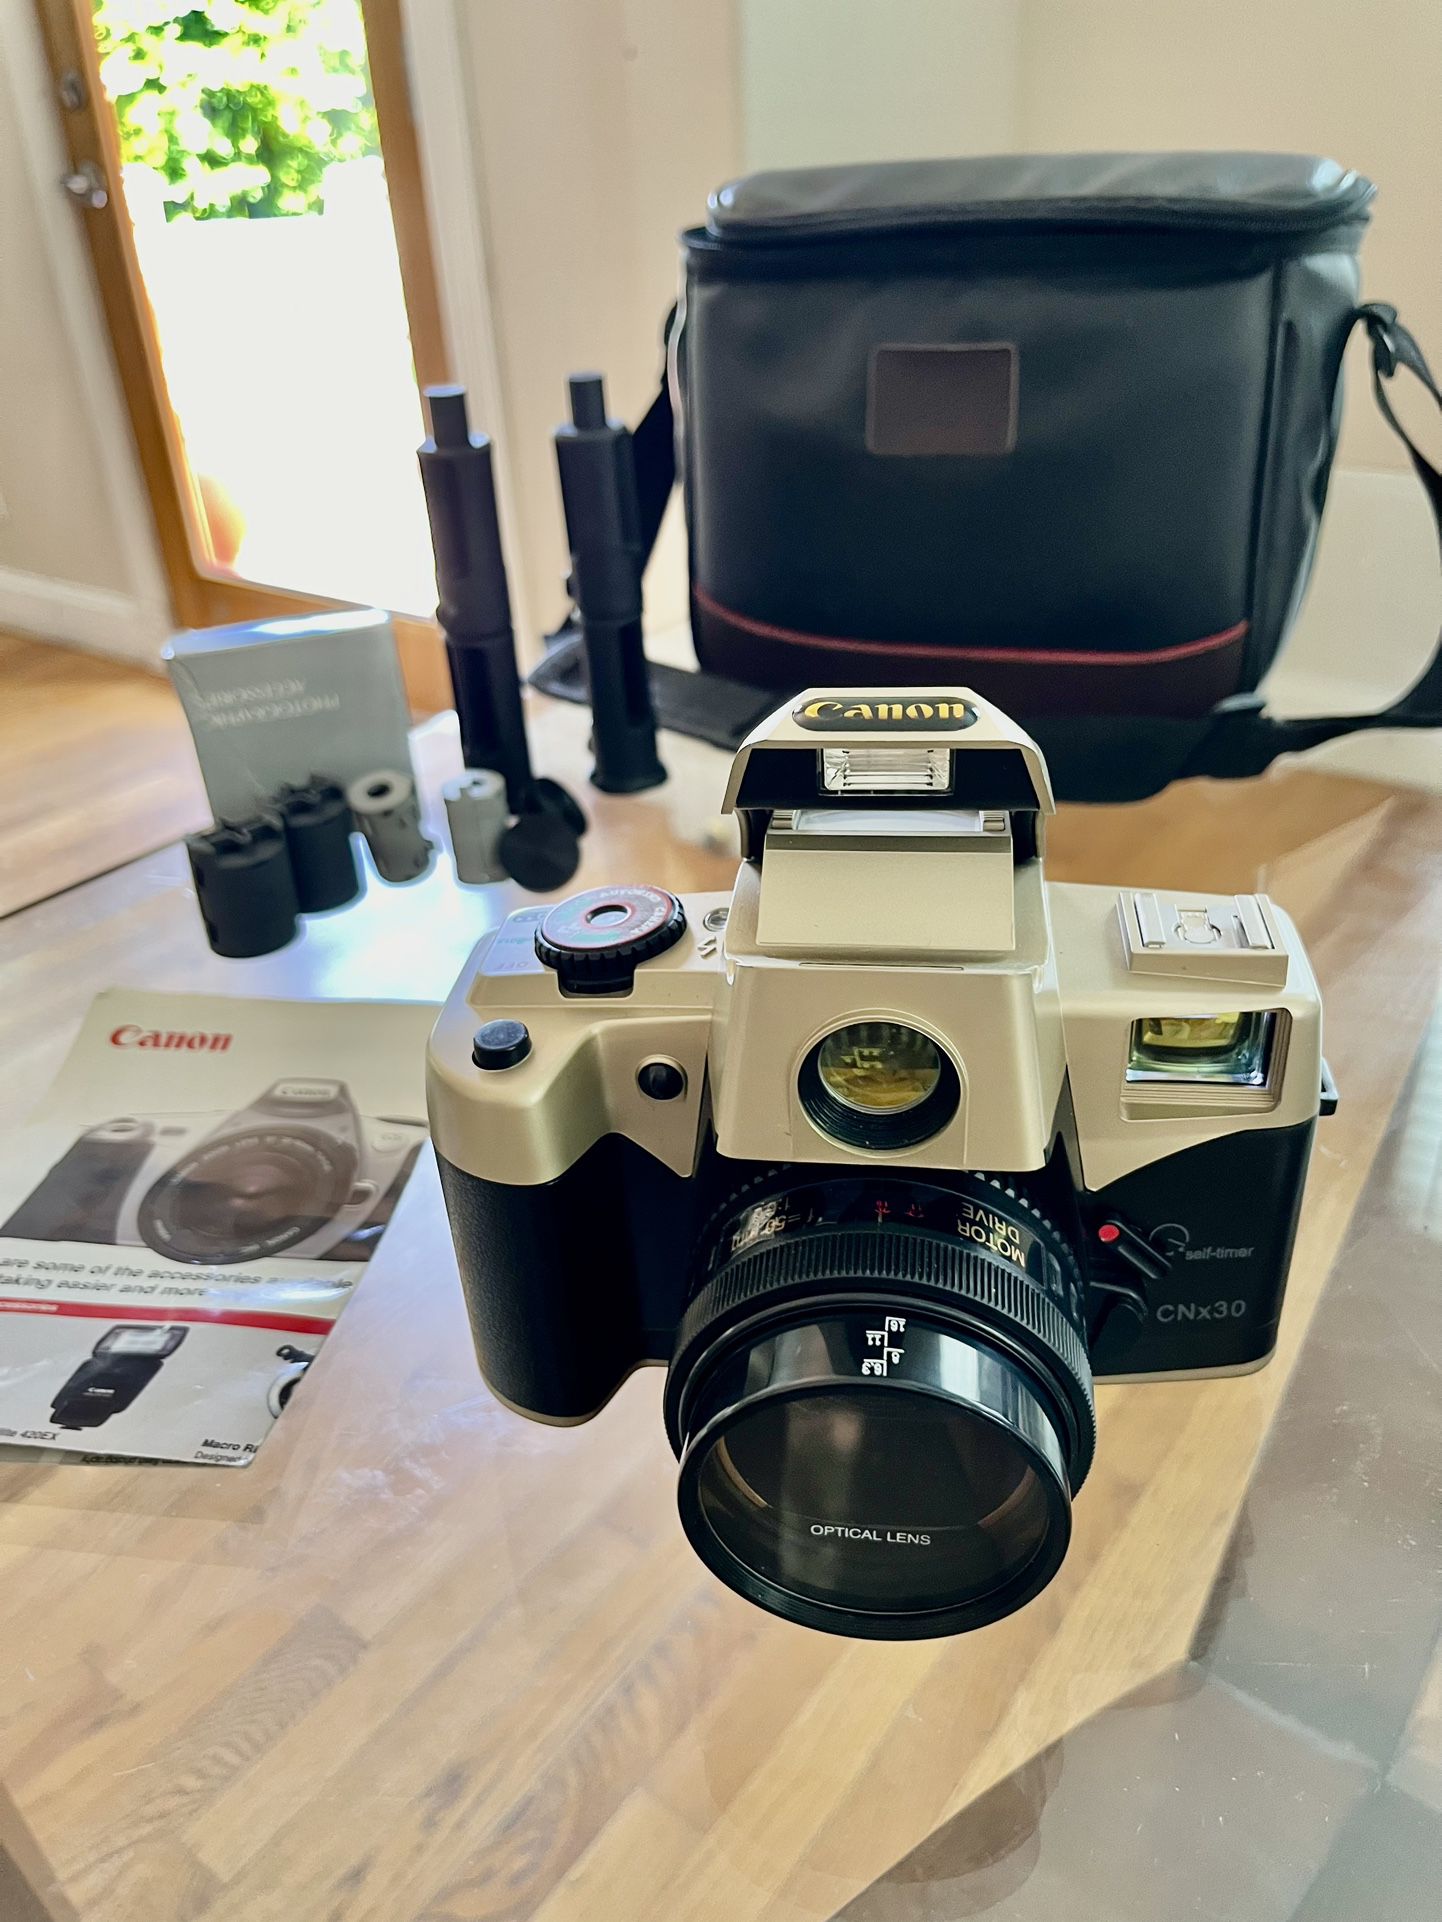 Canon CNx30 Camera With Case And Accessories very Good Condition With Original Kodak Film